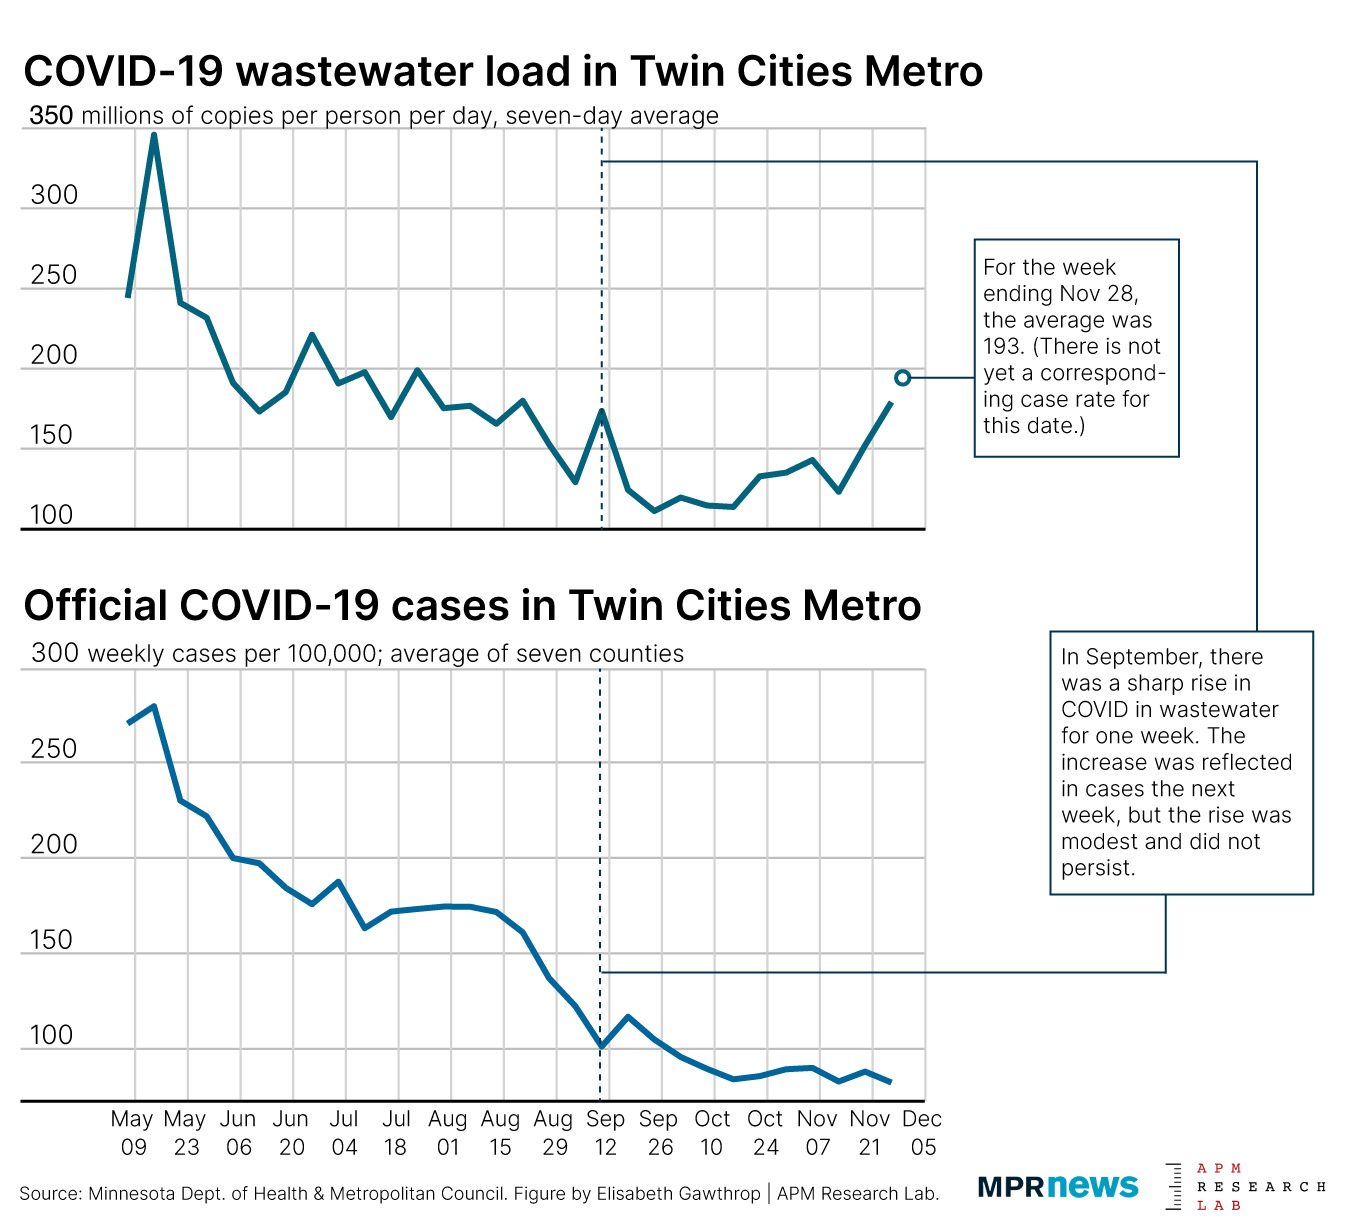 covid wastewater and case rates in twin cities metro